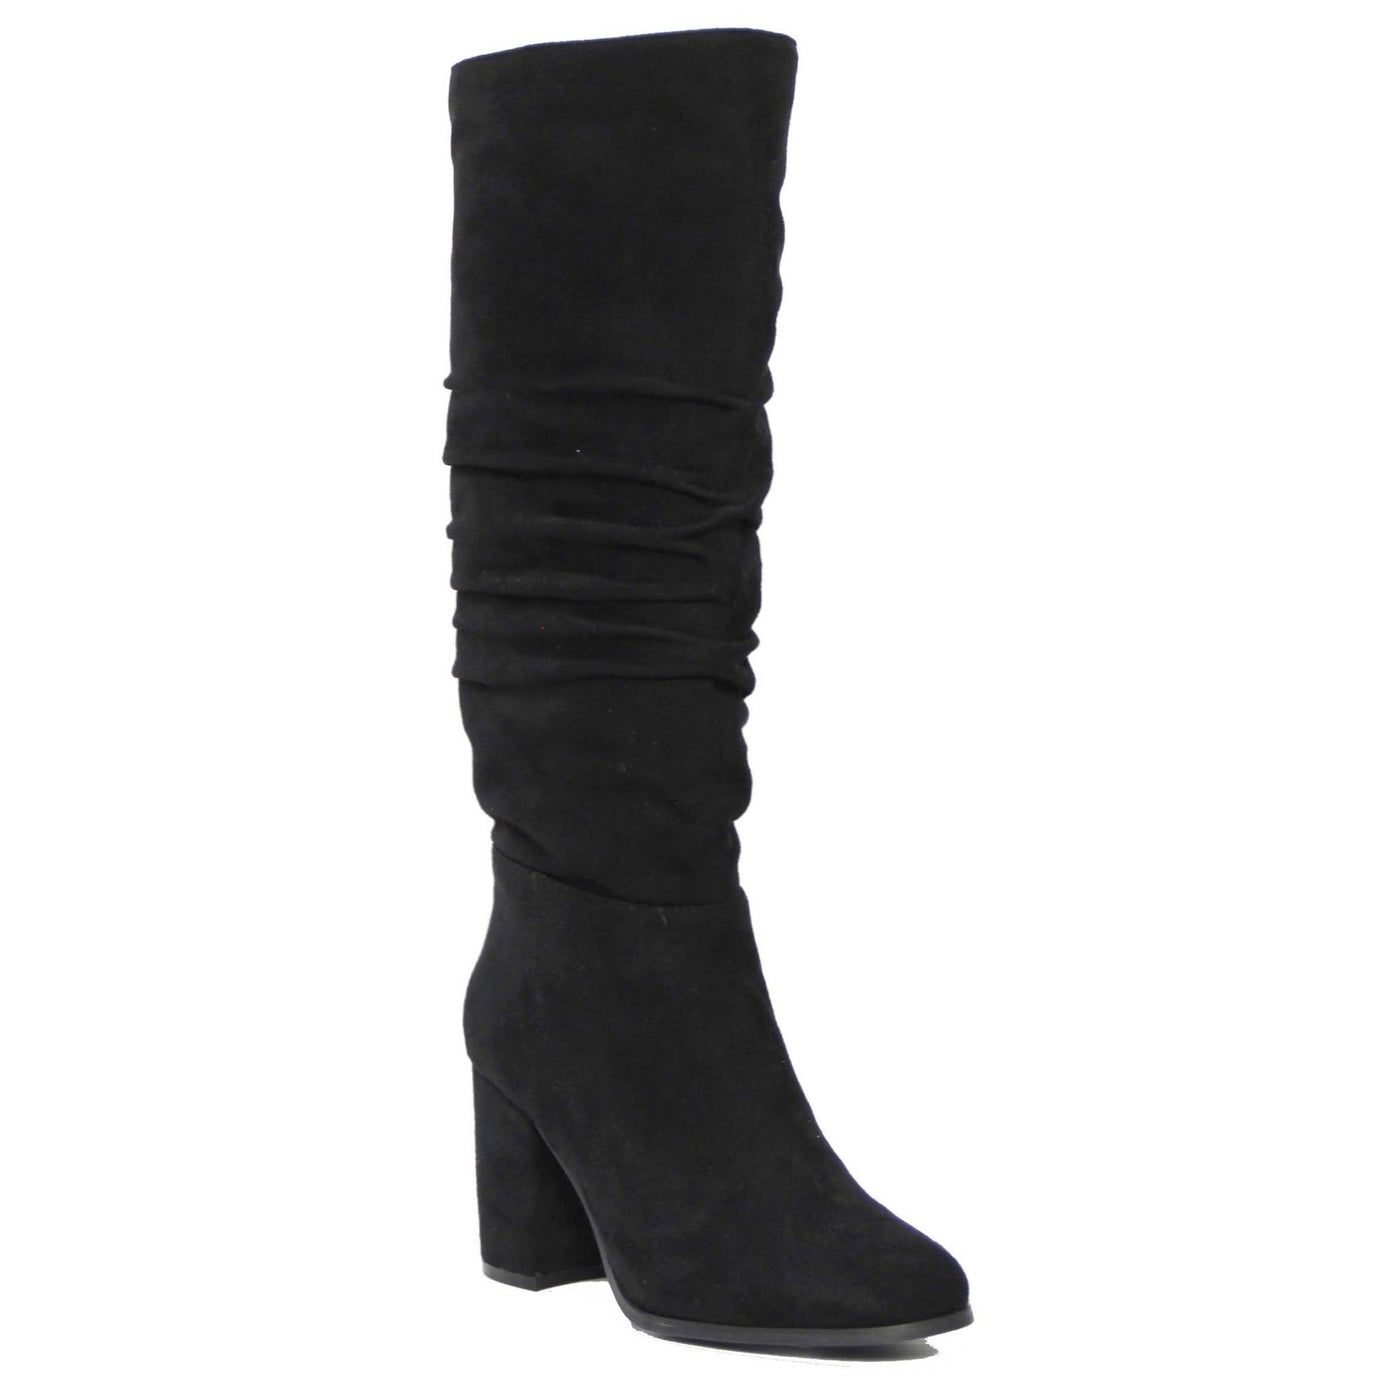 Therapy Staples Suede Full Boot with Heel and Ruched Calf in Black - Hey Sara